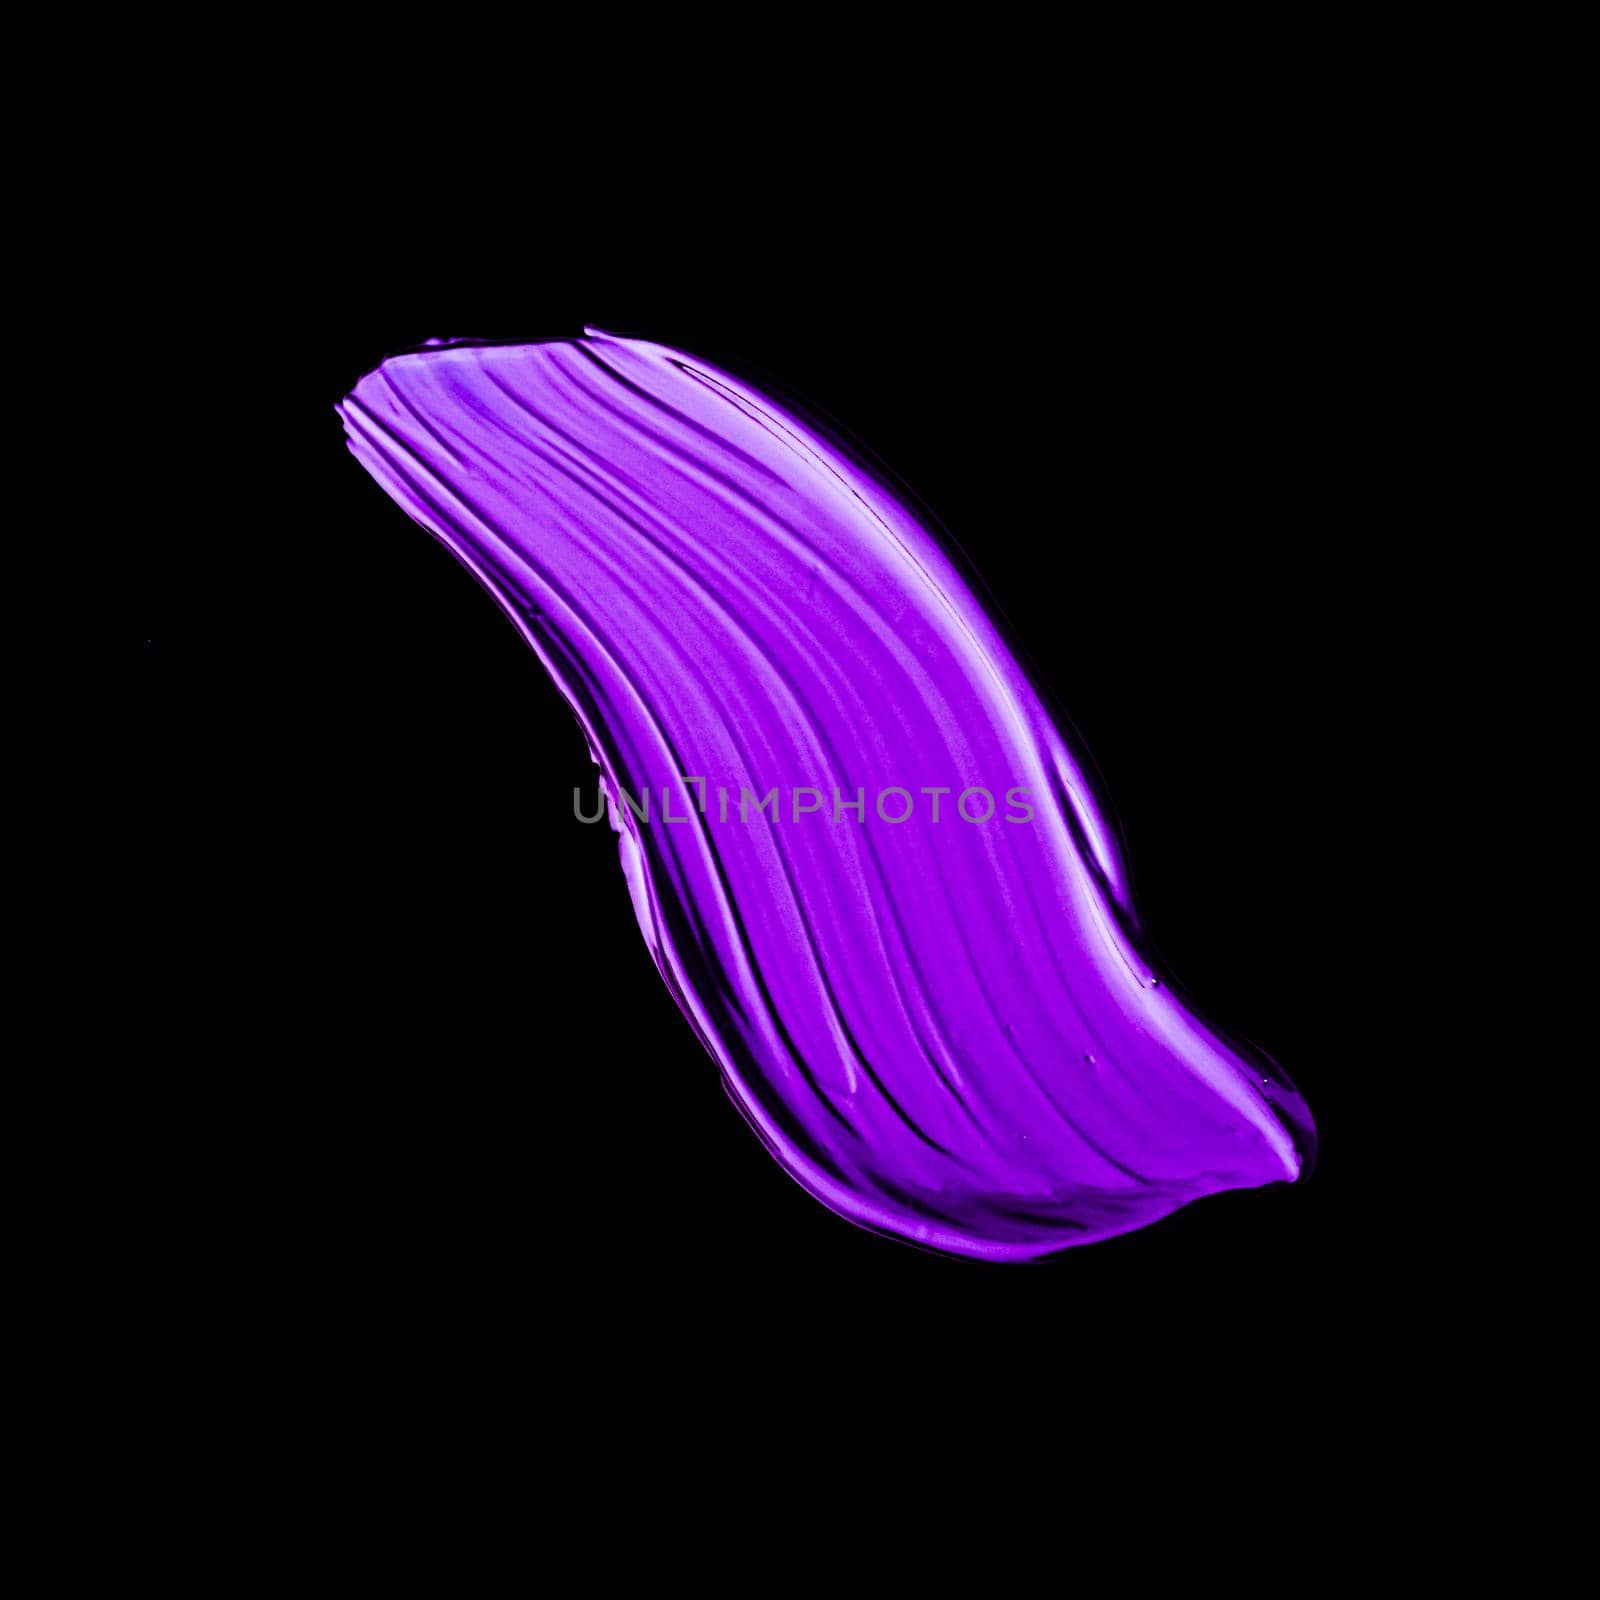 Purple neon paint brush stroke texture isolated on black background by Anneleven